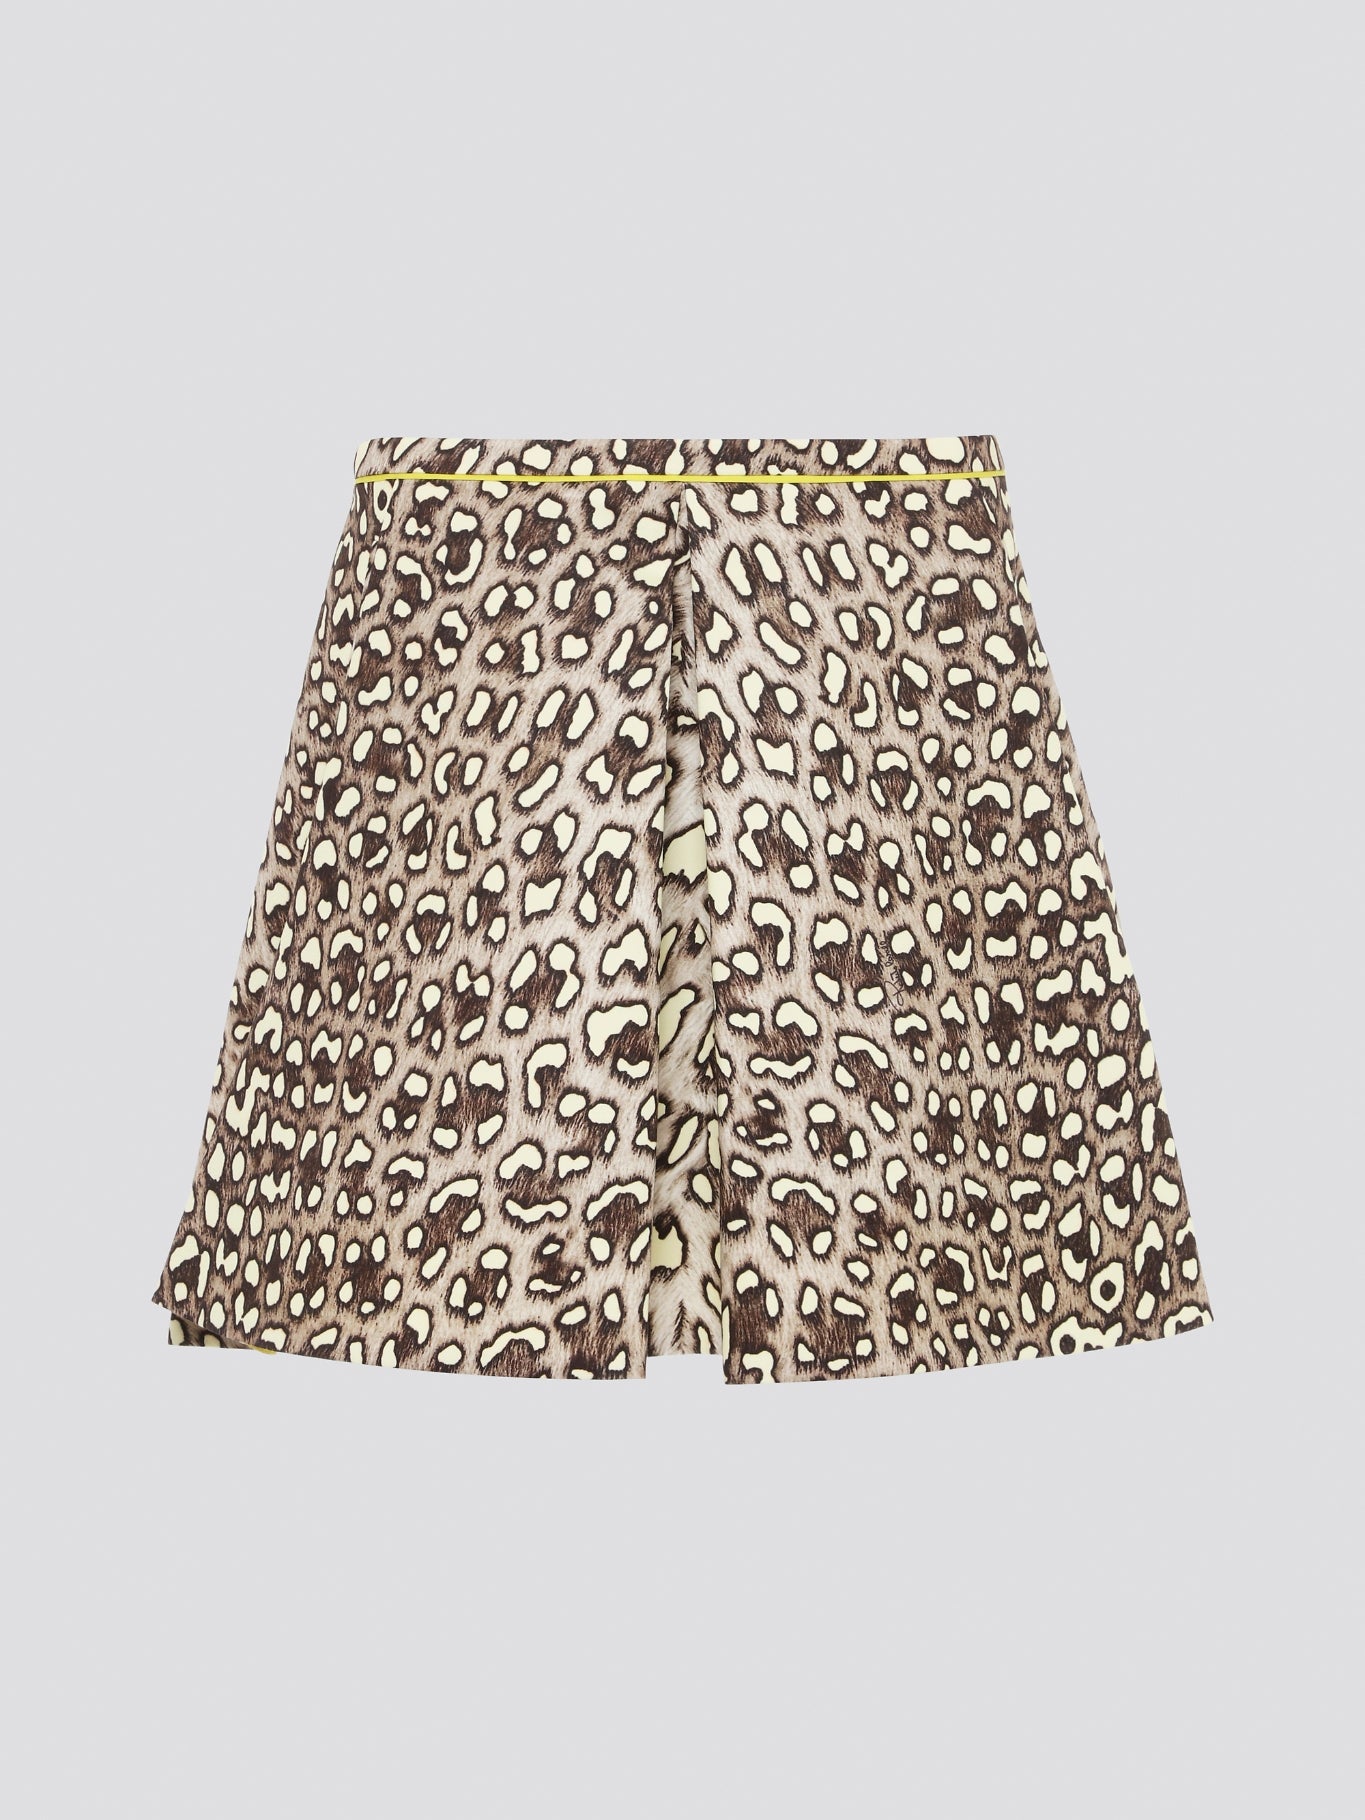 Unleash your wild side with the Leopard Print Box Pleat Mini Skirt from Roberto Cavalli. This fierce and flirty skirt features a bold leopard print pattern that is sure to turn heads wherever you go. With its flattering box pleats and mini length, this skirt is perfect for a night out on the town or a stylish day at the office.